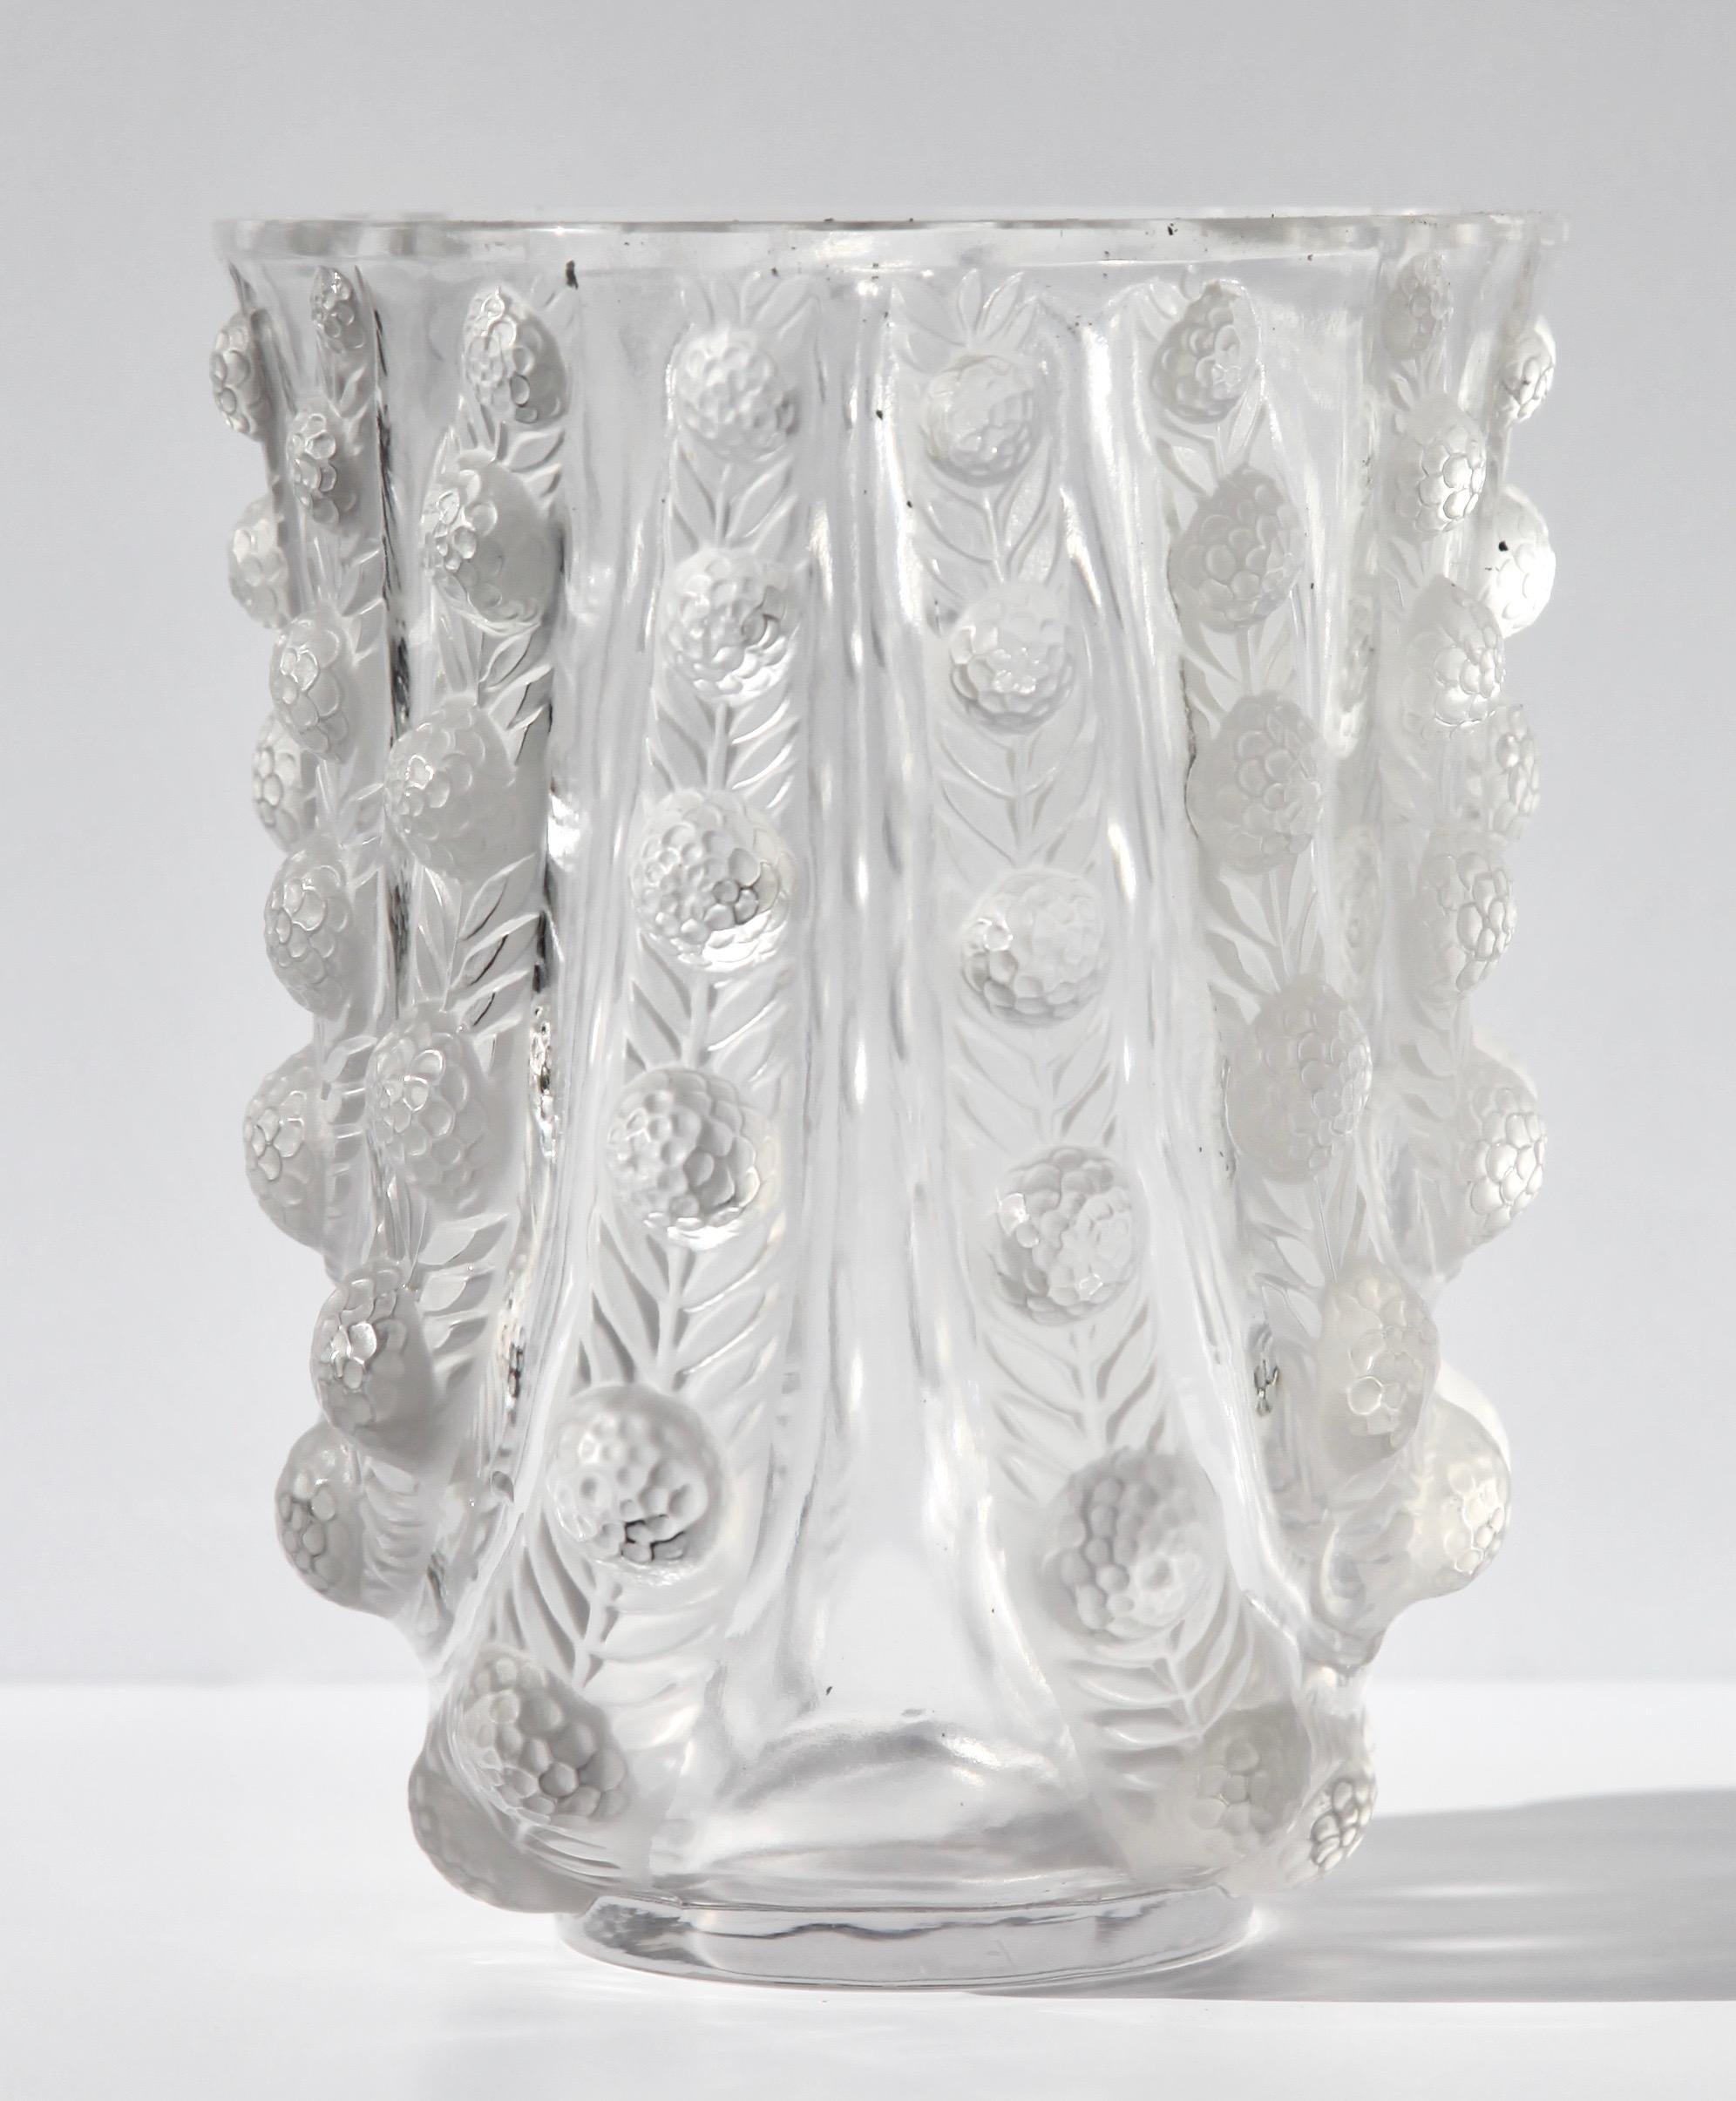 French Art Deco R. Lalique Vichy Vase,  Graduating Wavy Leaf Design Clear and Frosted